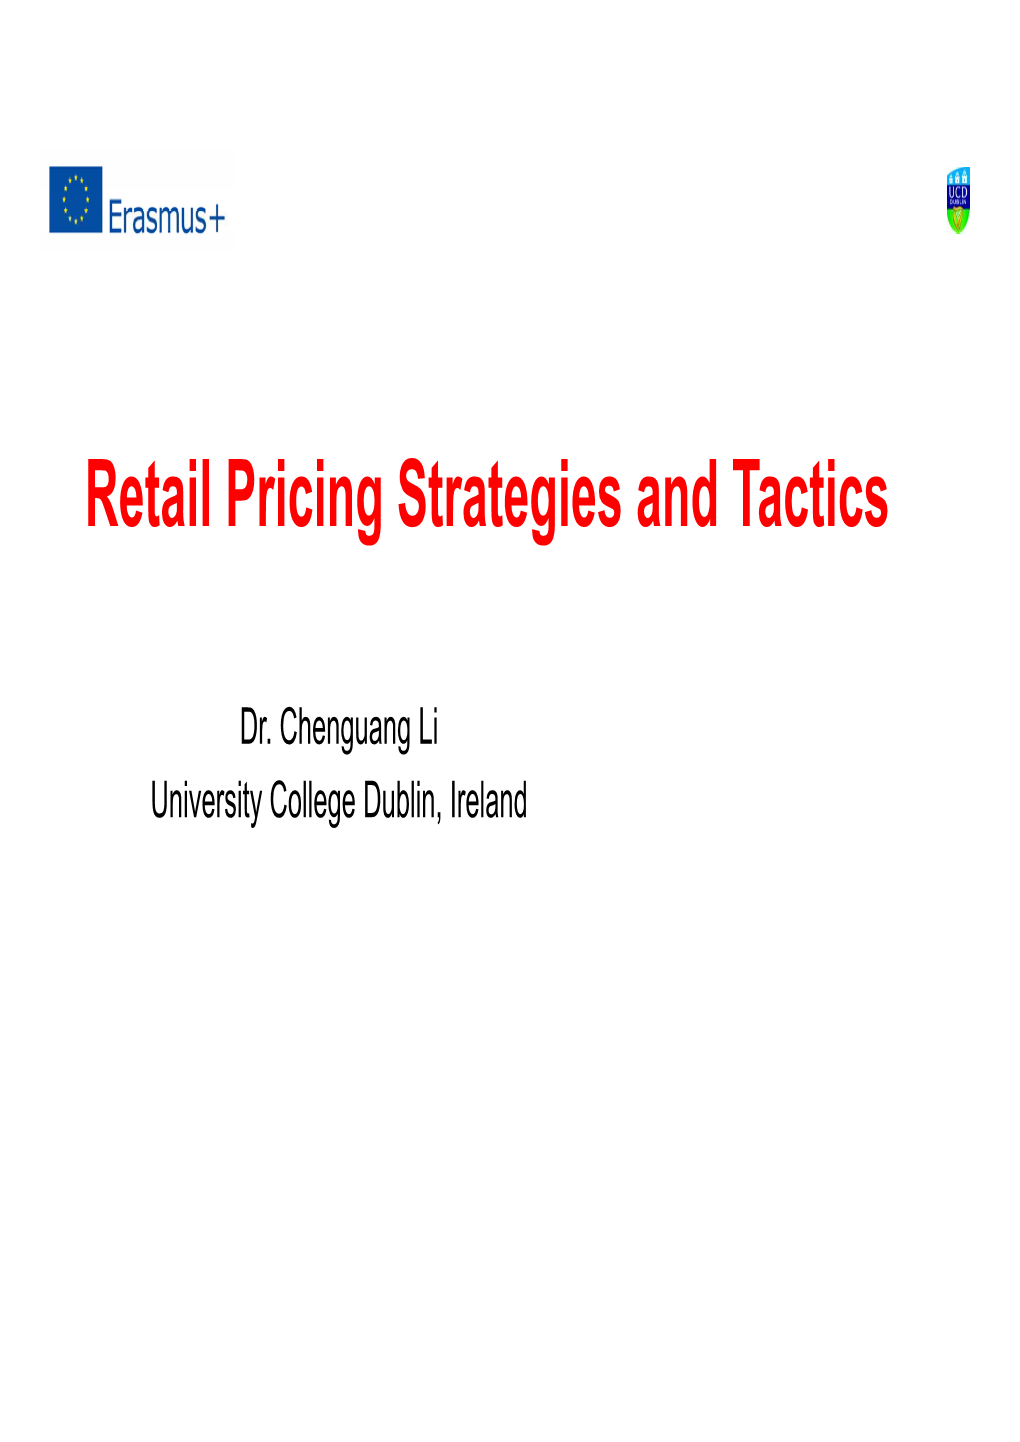 Retail Pricing Strategies and Tactics